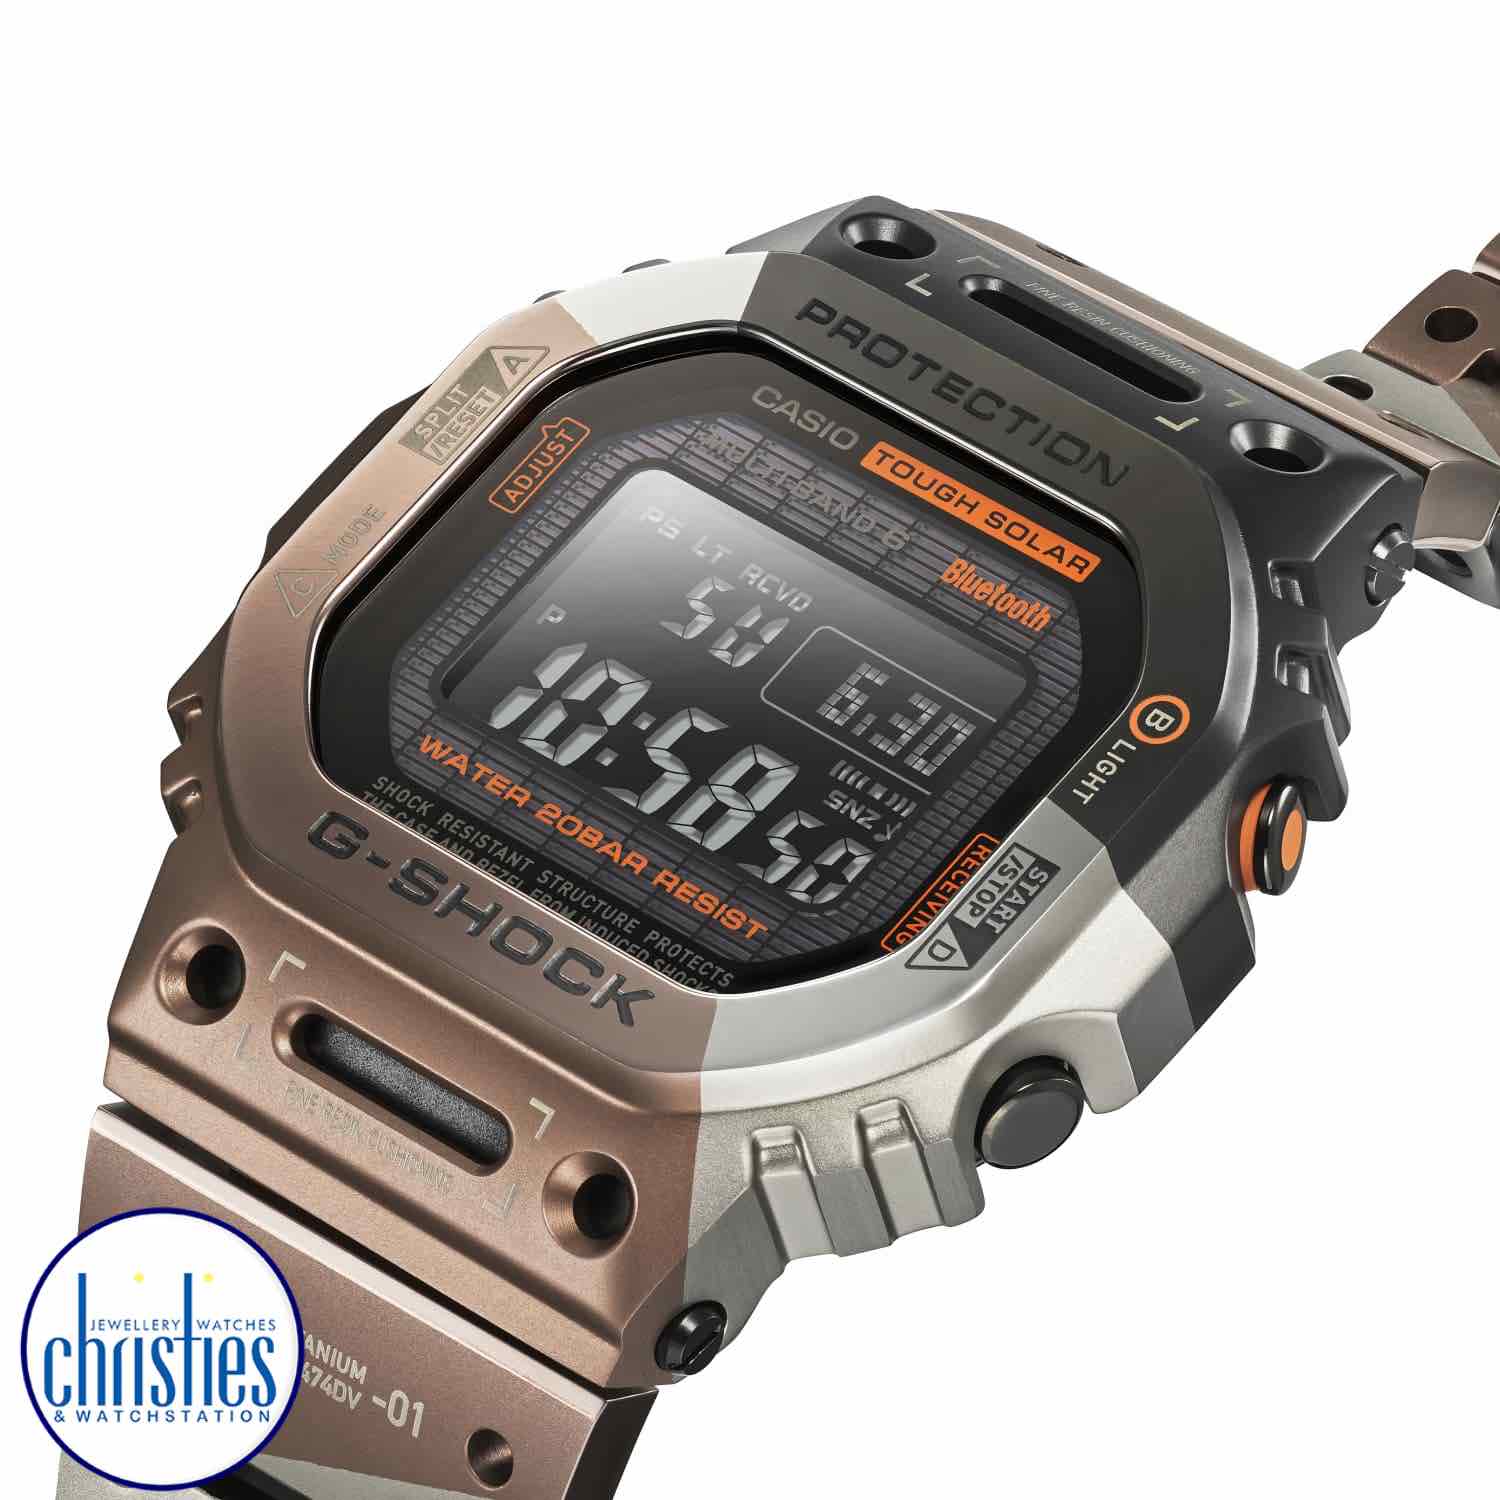 GMWB5000TVB-1D G-Shock Titanium Geometric Camo Watch. Up your game with some serious timekeeping.